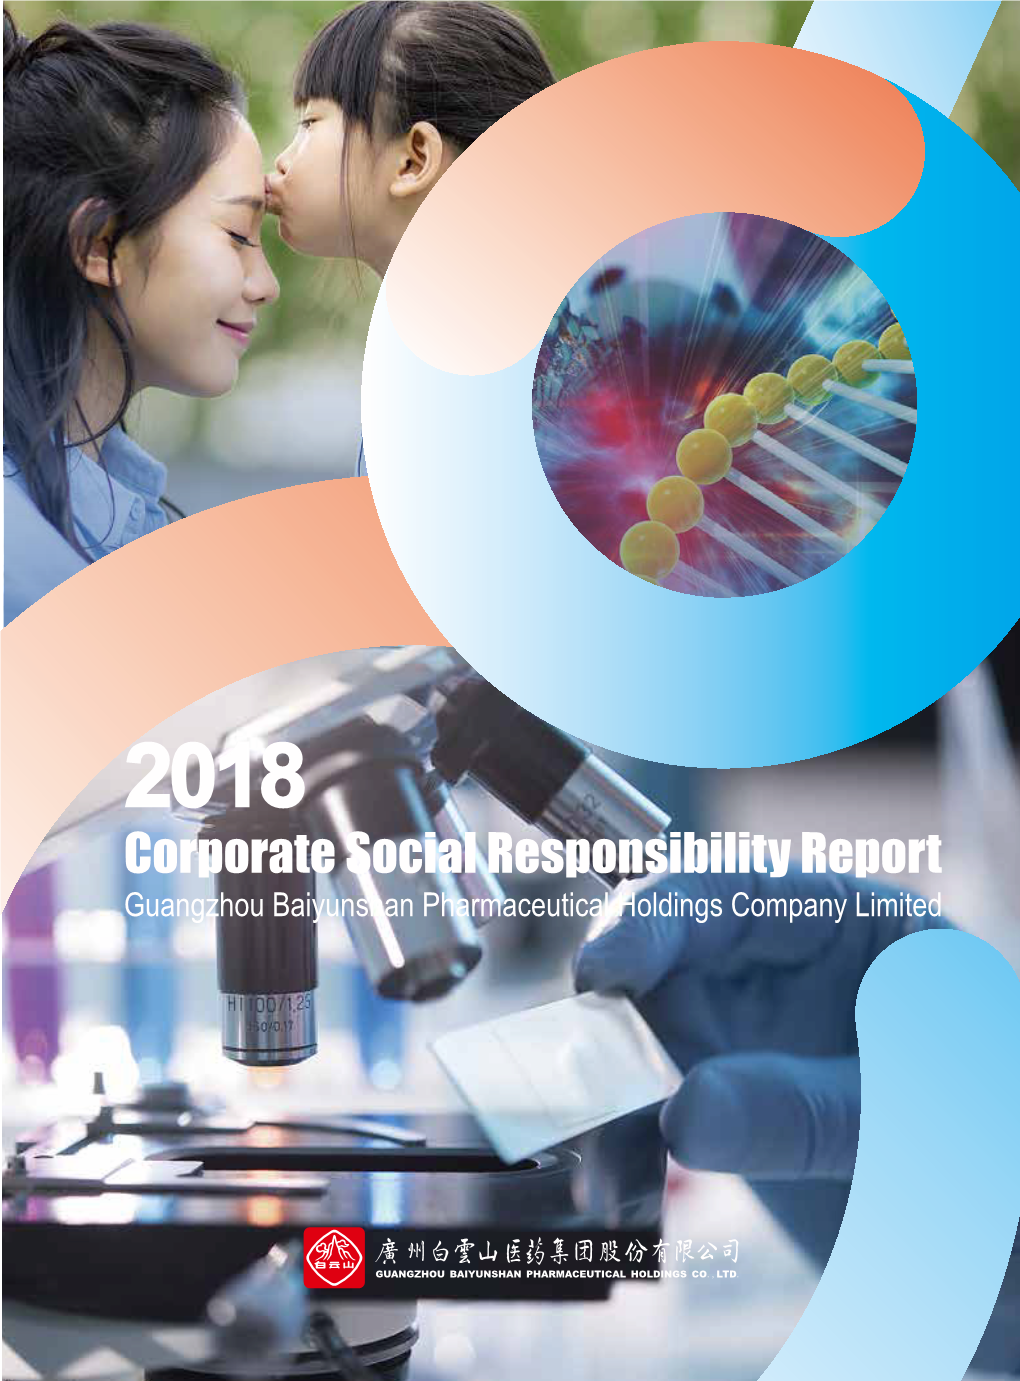 2018 Corporate Social Responsibility Report Guangzhou Baiyunshan Pharmaceutical Holdings Company Limited ABOUT THIS REPORT CONTENTS